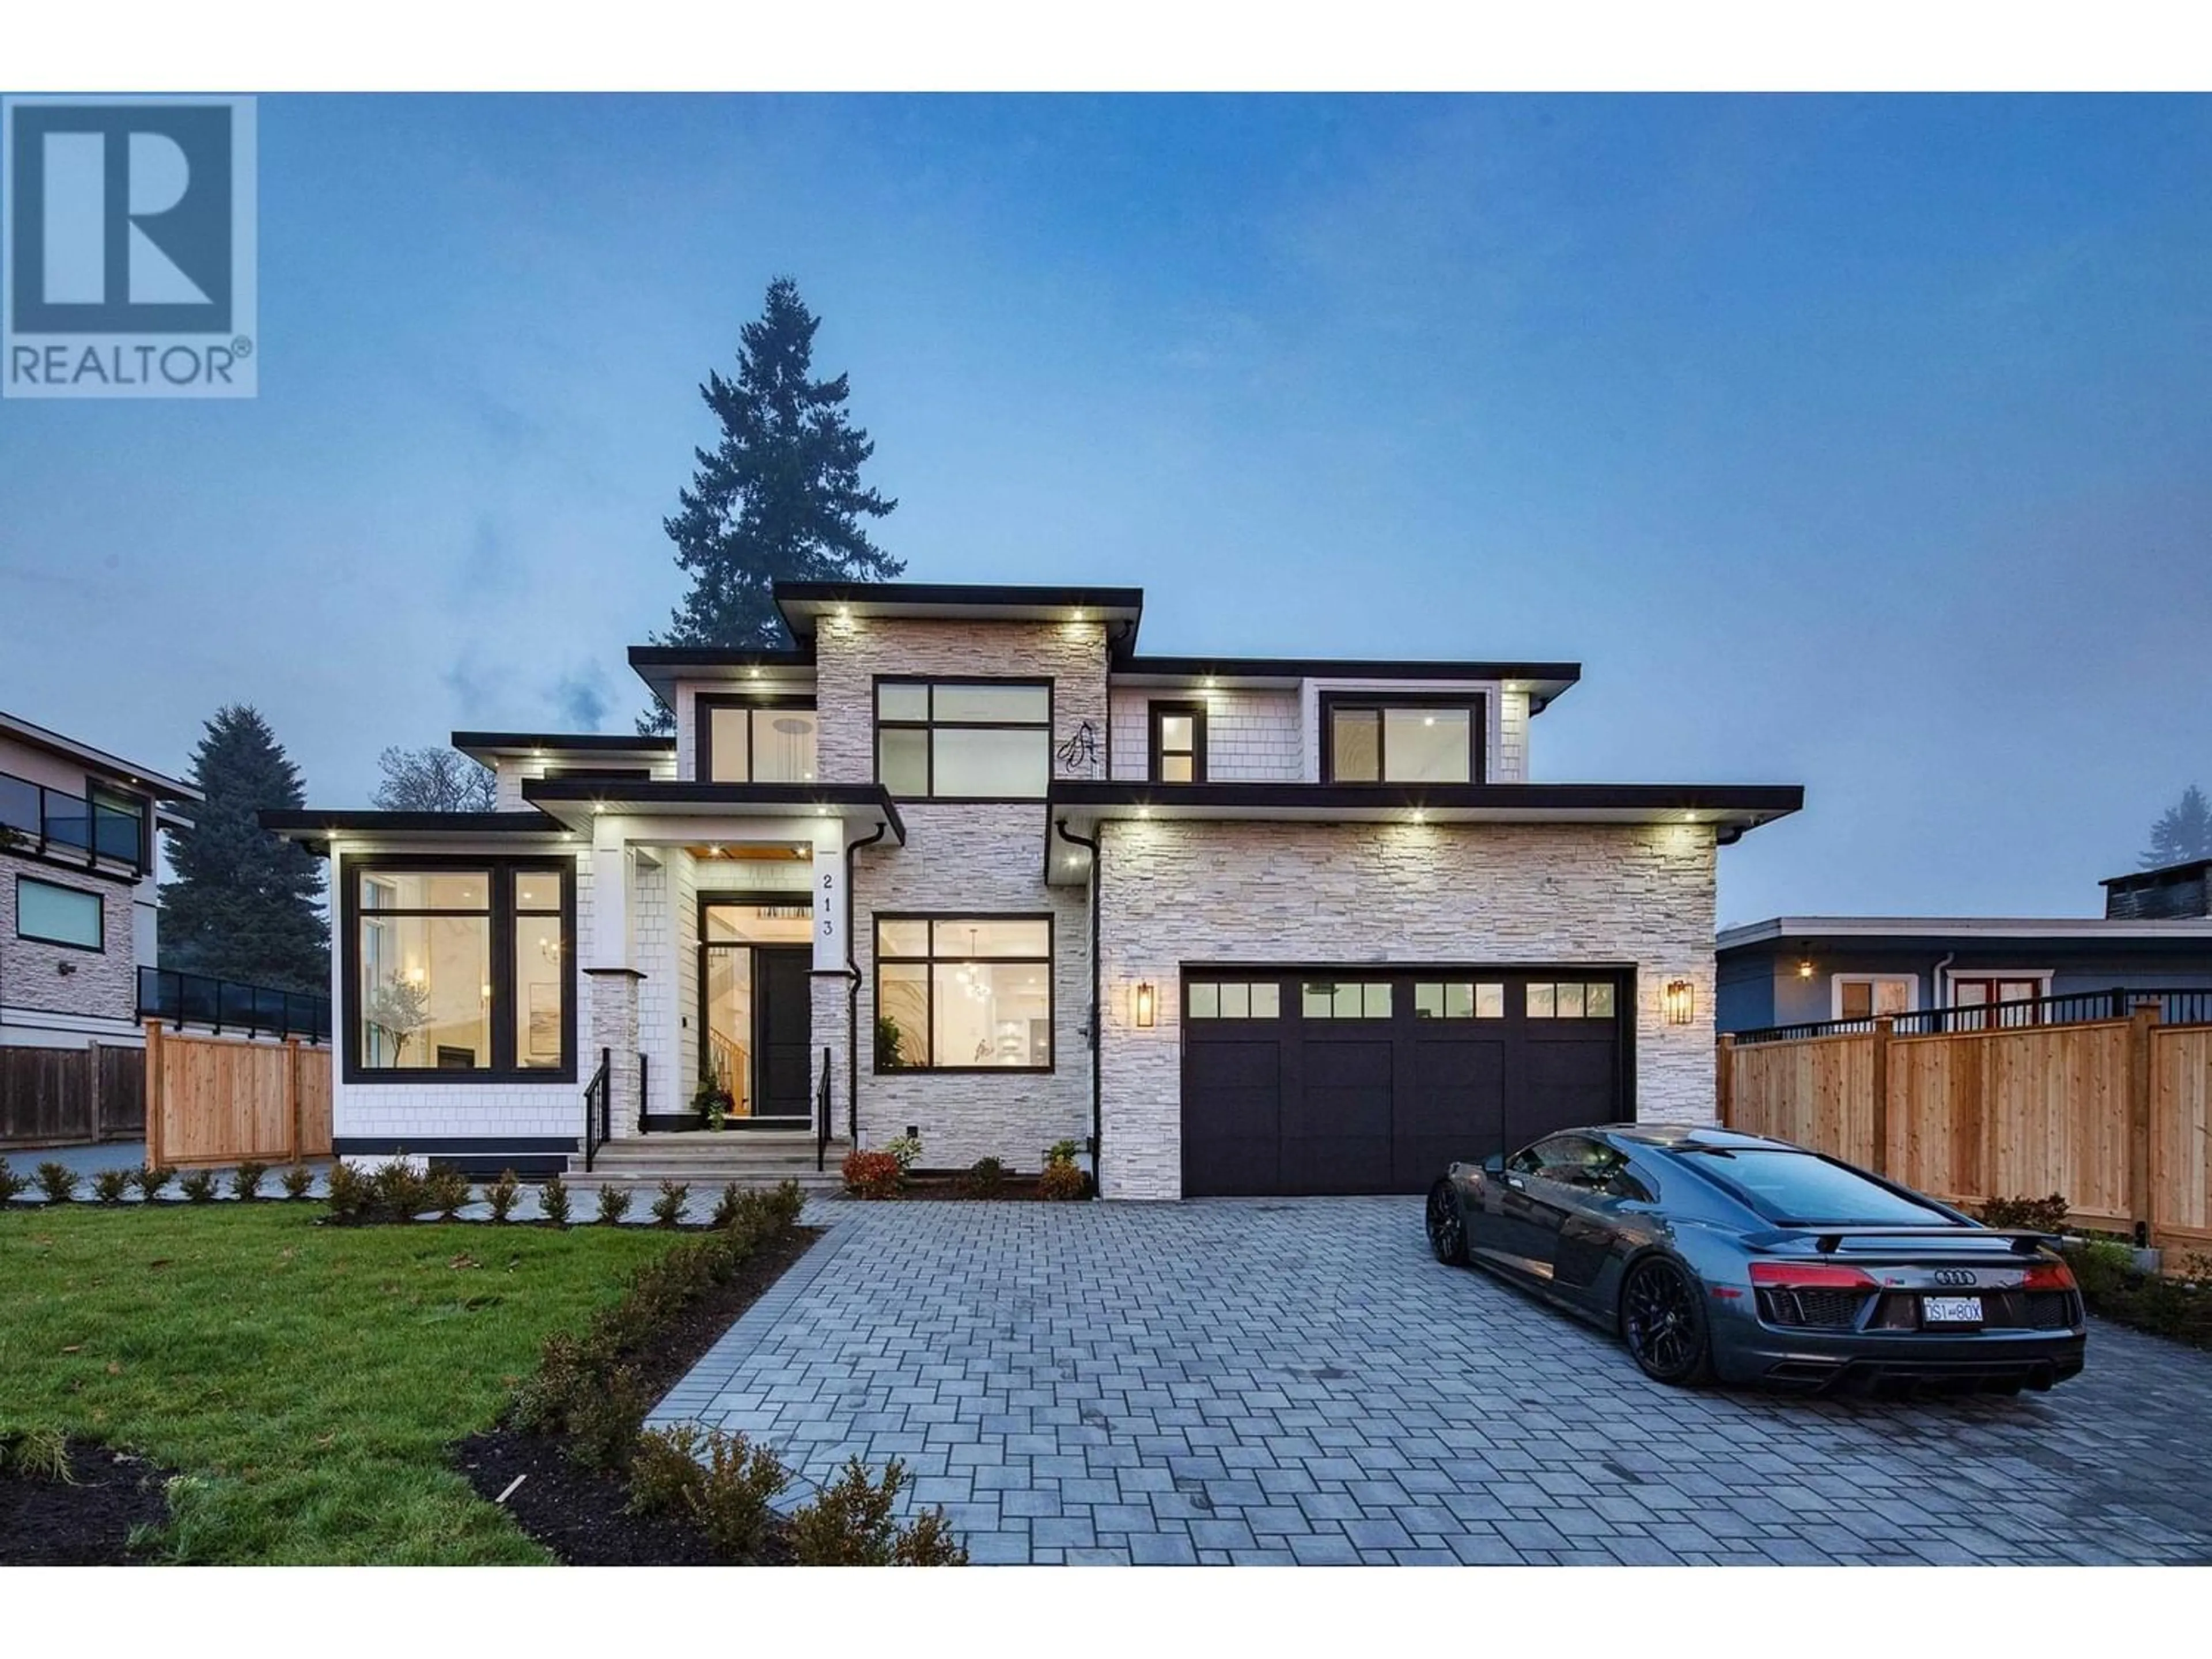 Home with brick exterior material for 213 FINNIGAN STREET, Coquitlam British Columbia V3K5J5